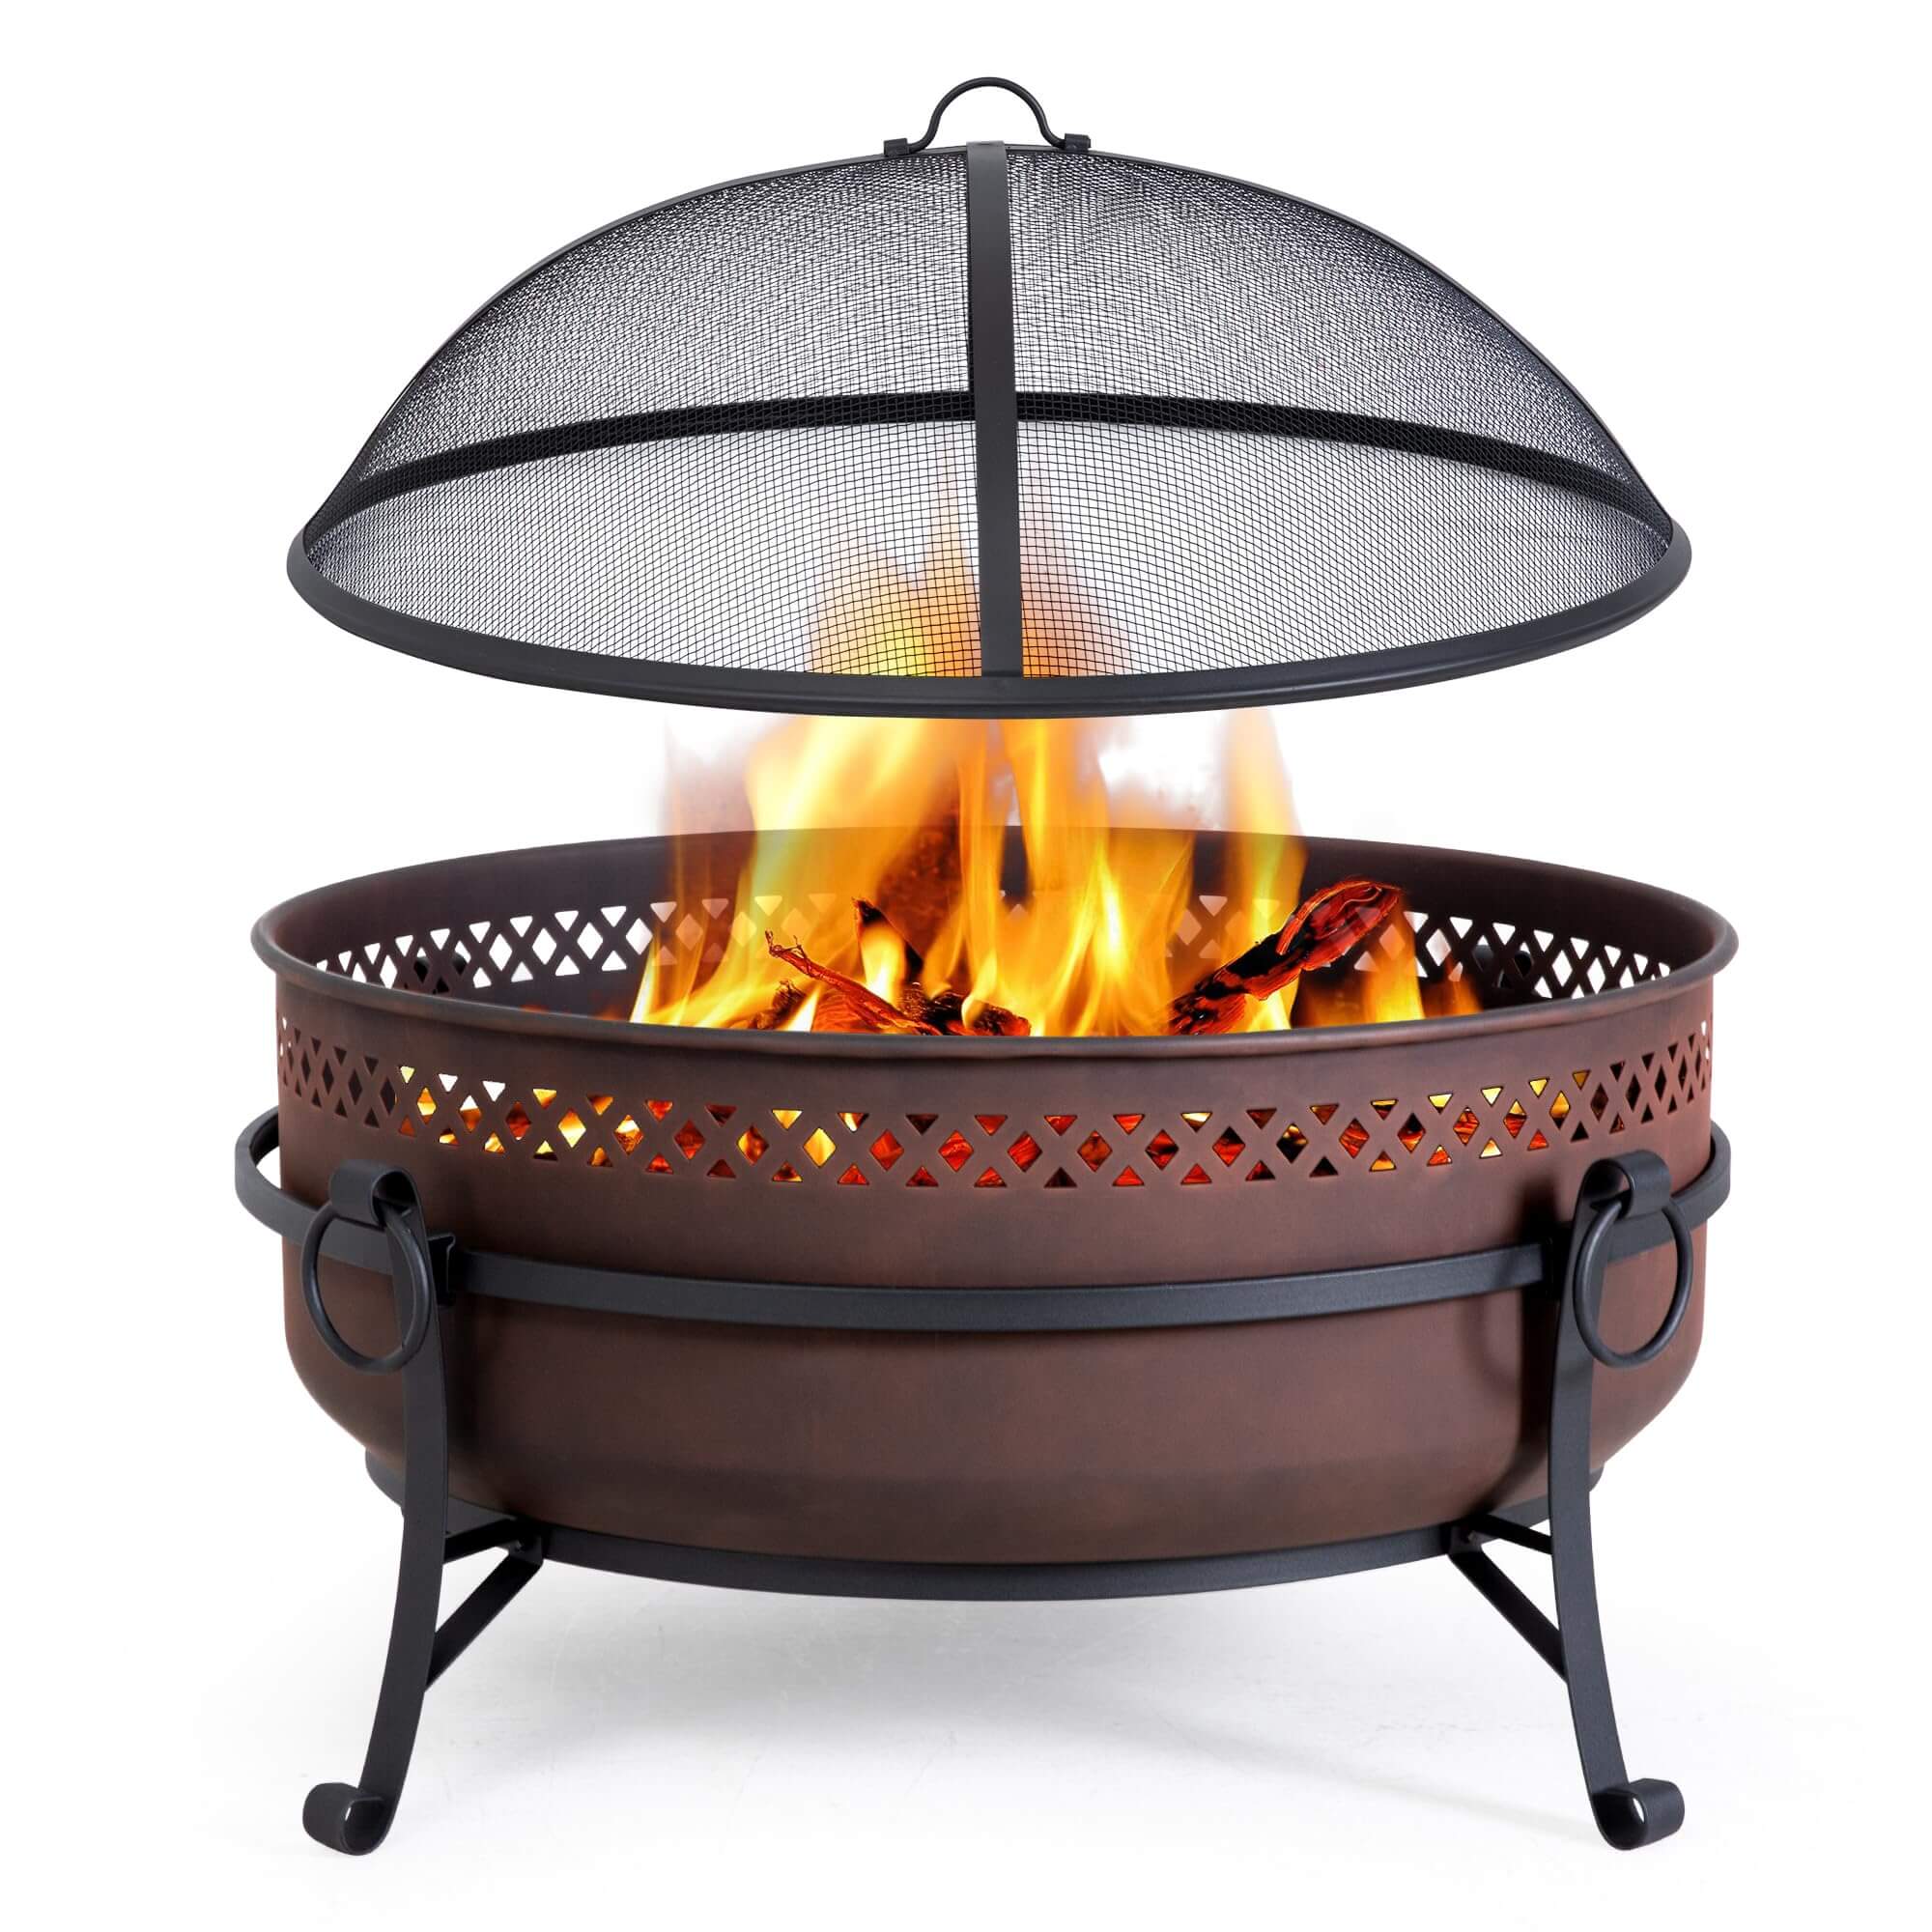 Outdoor-Bonfire-Wood-Burning-Fire-Pit-with-Grill-and-Fireplace-Poker#size_36-inch